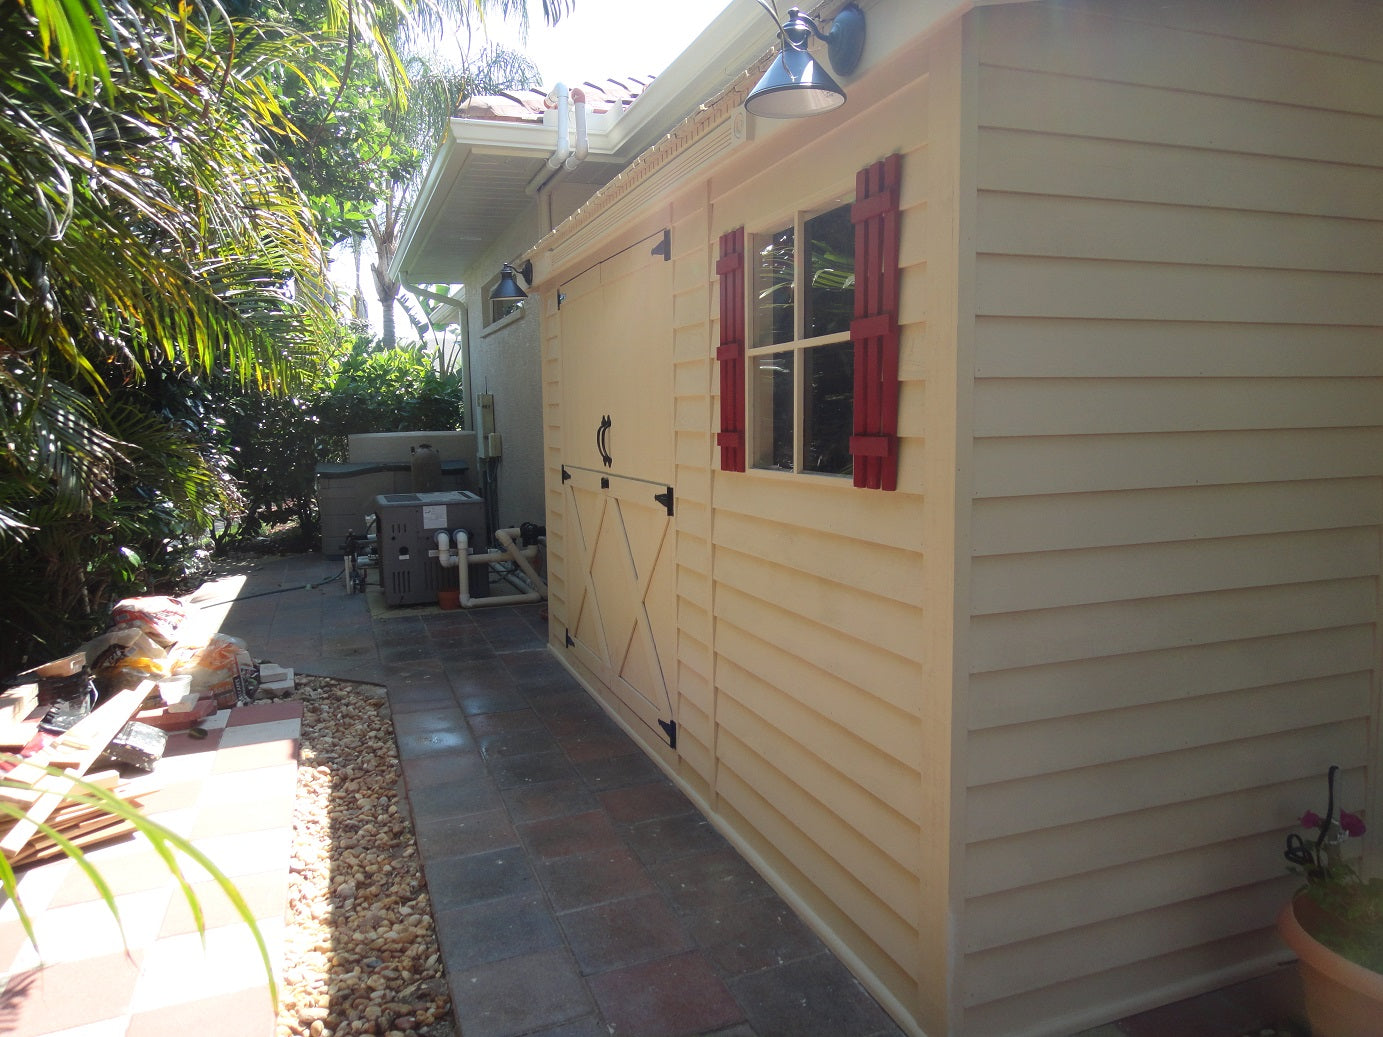 Yard Storage Sheds, 8 x 4 Shed Kits, DIY Lean to Style ...